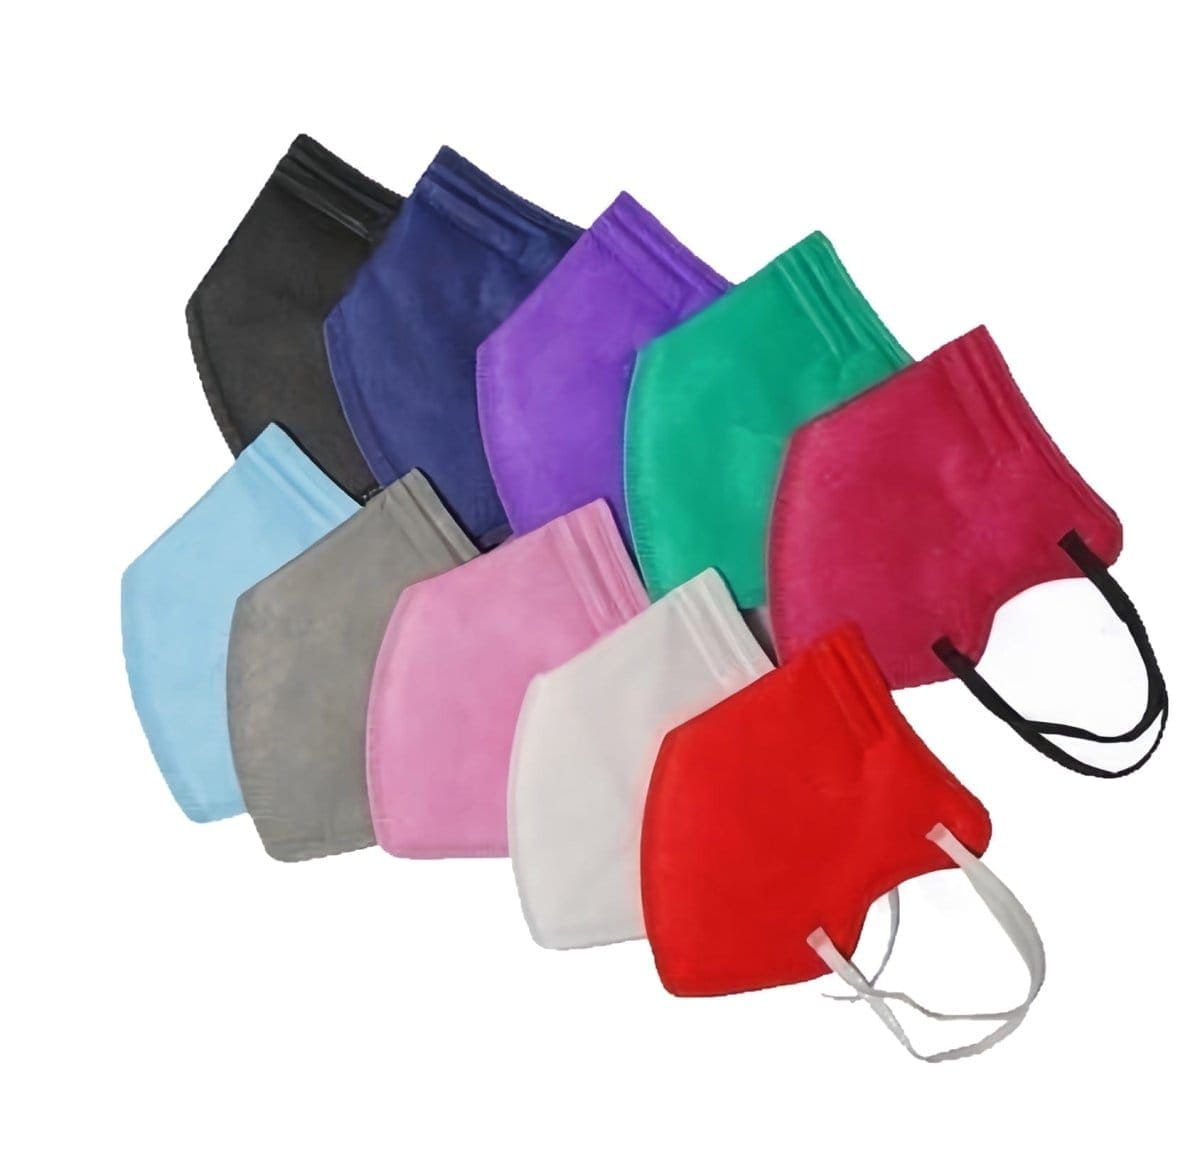 Small or Petite KN95 Face Masks, Small Size Mask